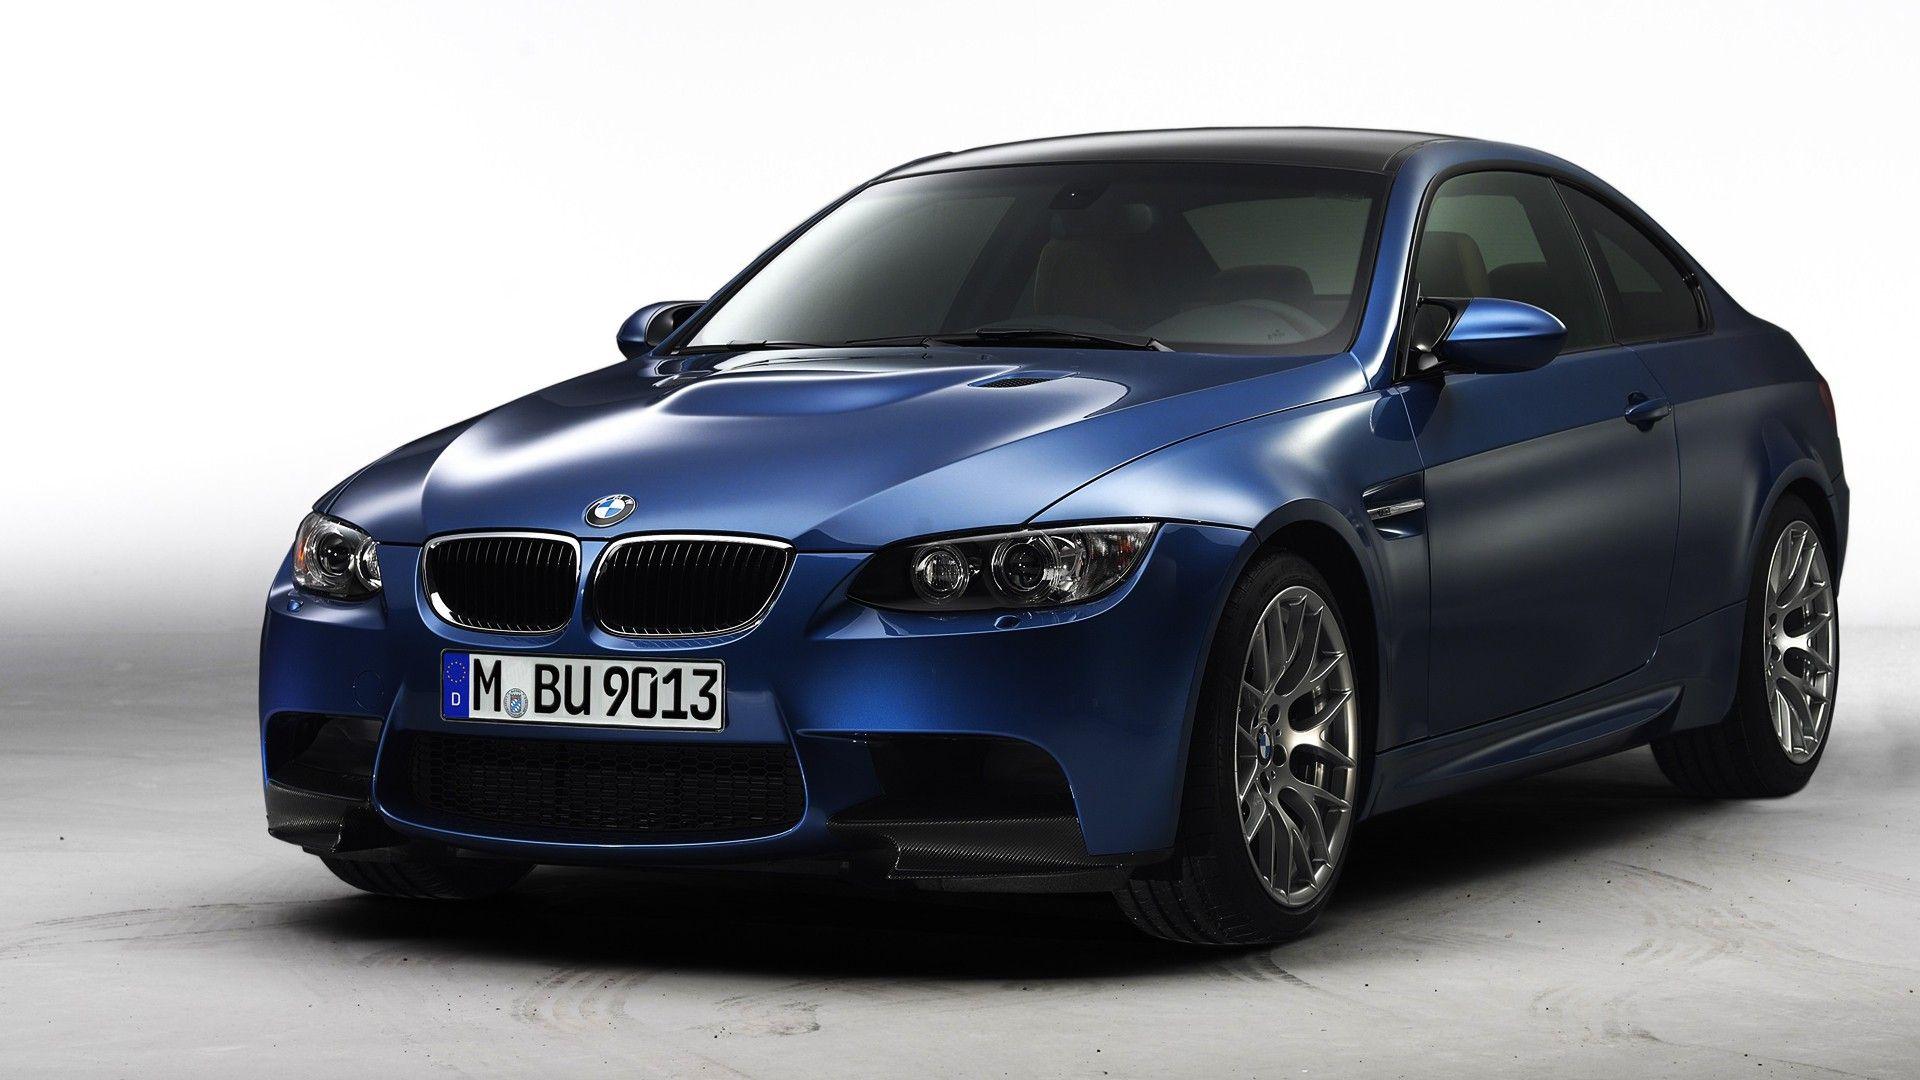 Wallpaper Bmw Cars HD New On Car Image Image For Androids